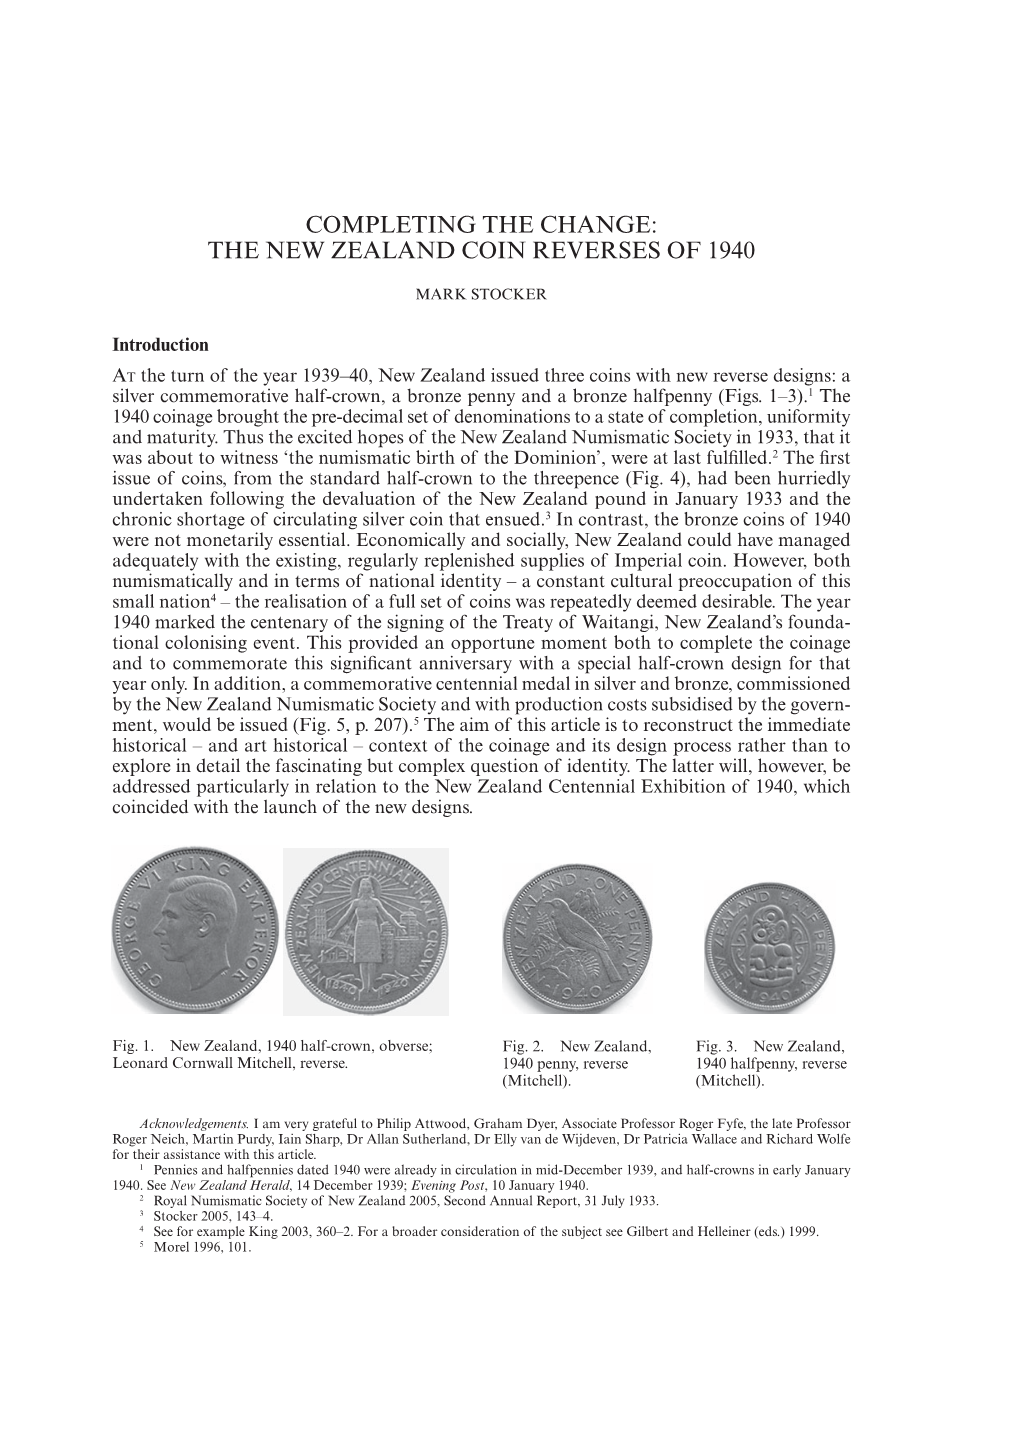 The New Zealand Coin Reverses of 1940